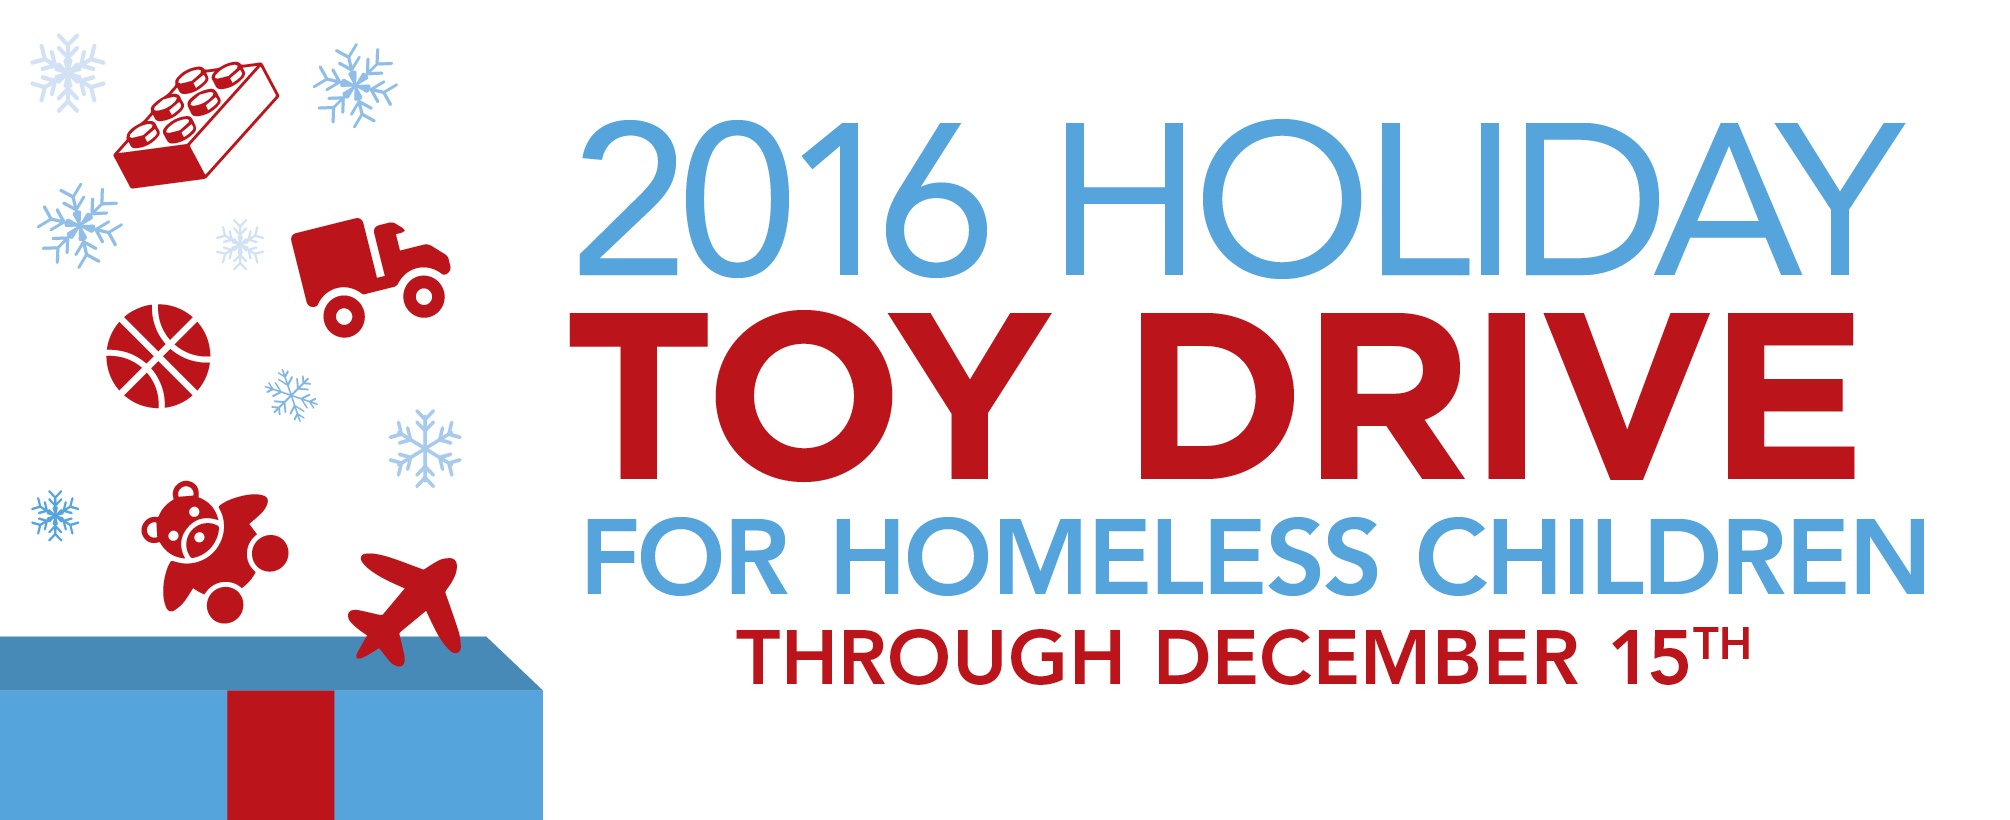 2016 Holiday Toy Drive